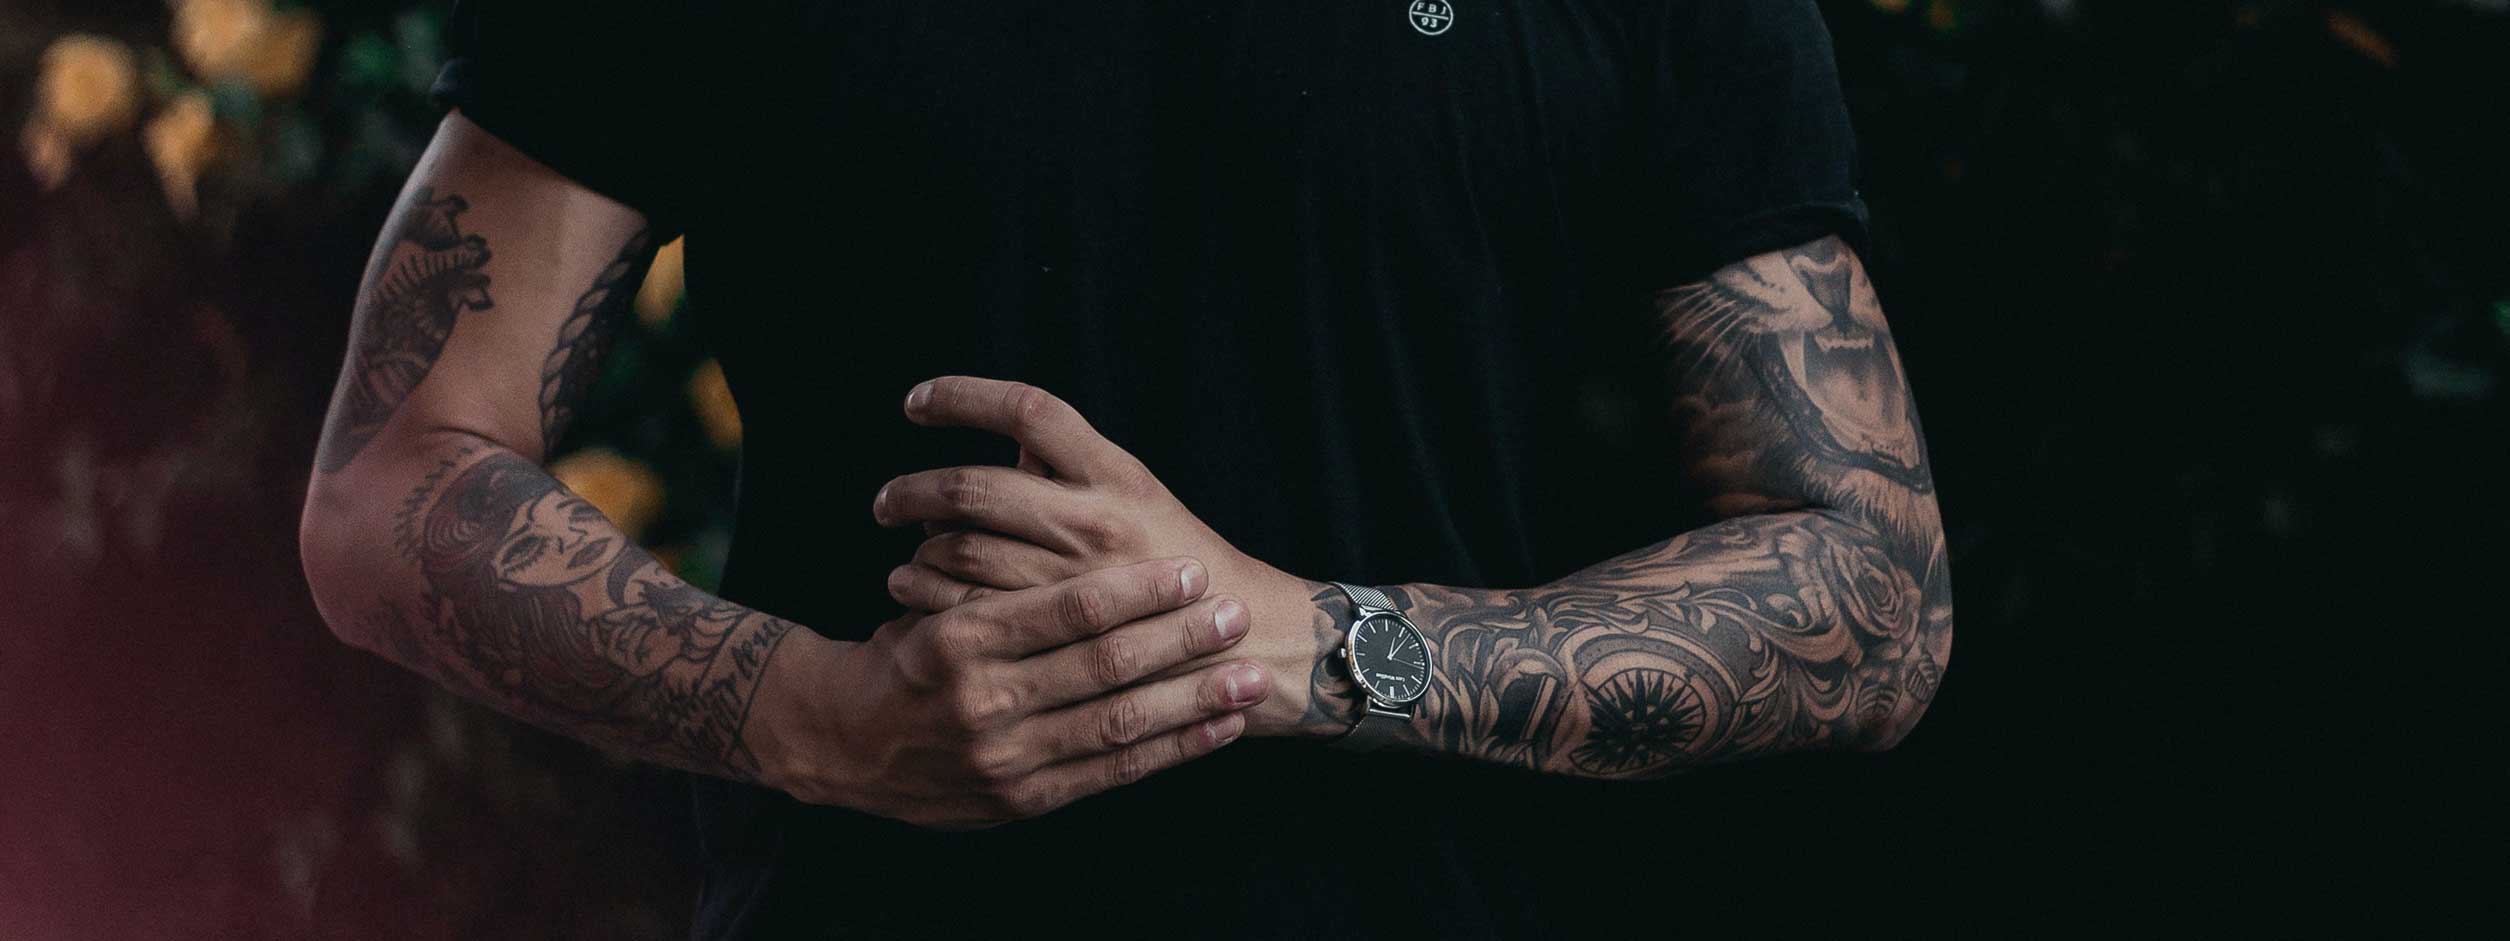 man in black t-shirt clasping hands showing fully tattooed forearms